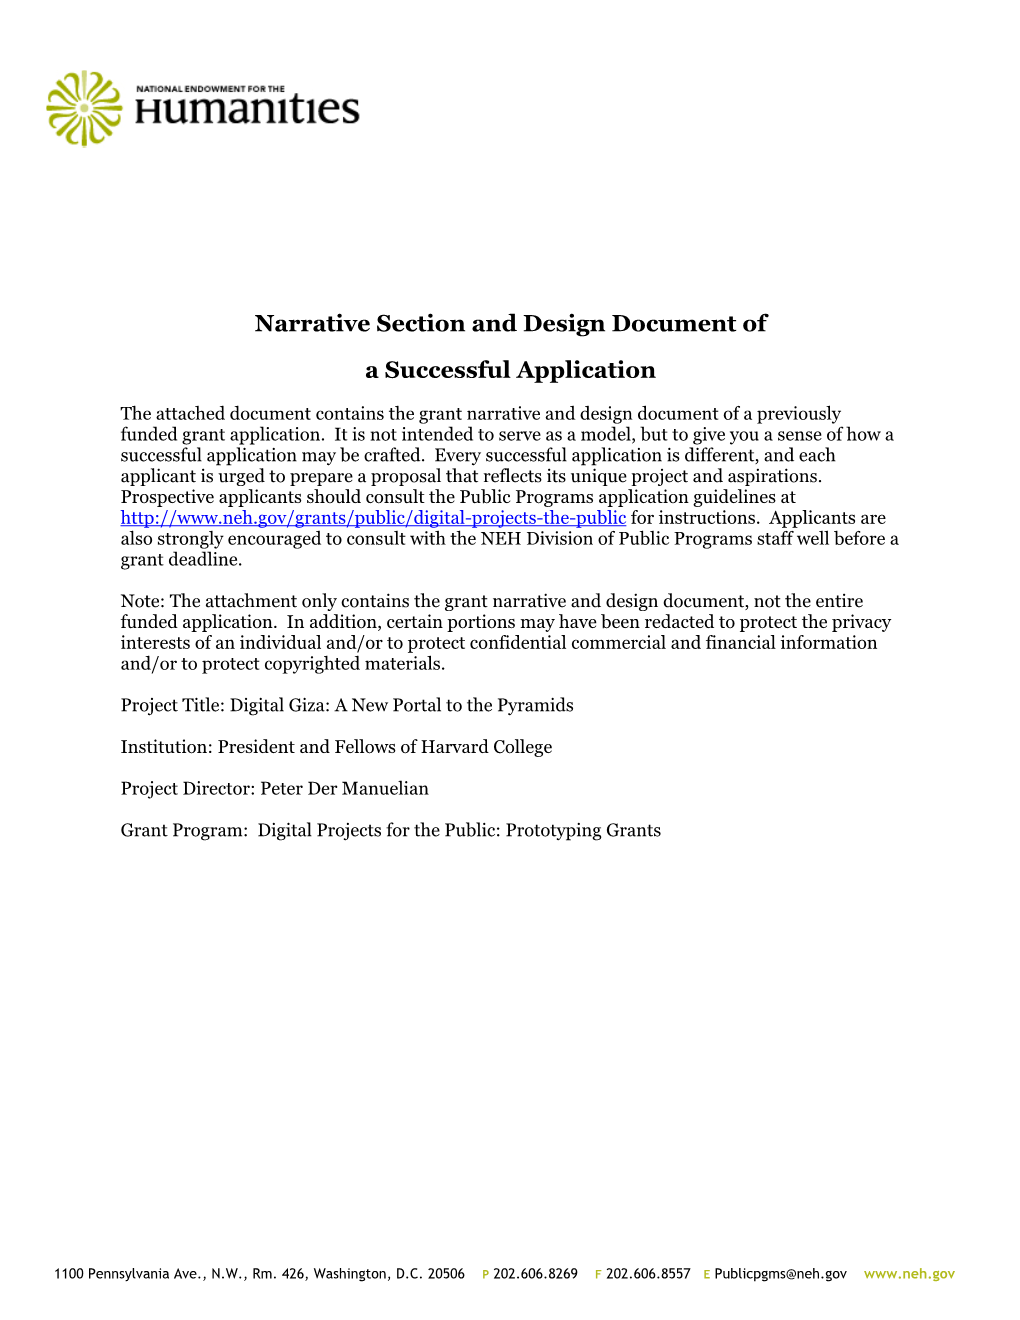 Narrative Section and Design Document of a Successful Application